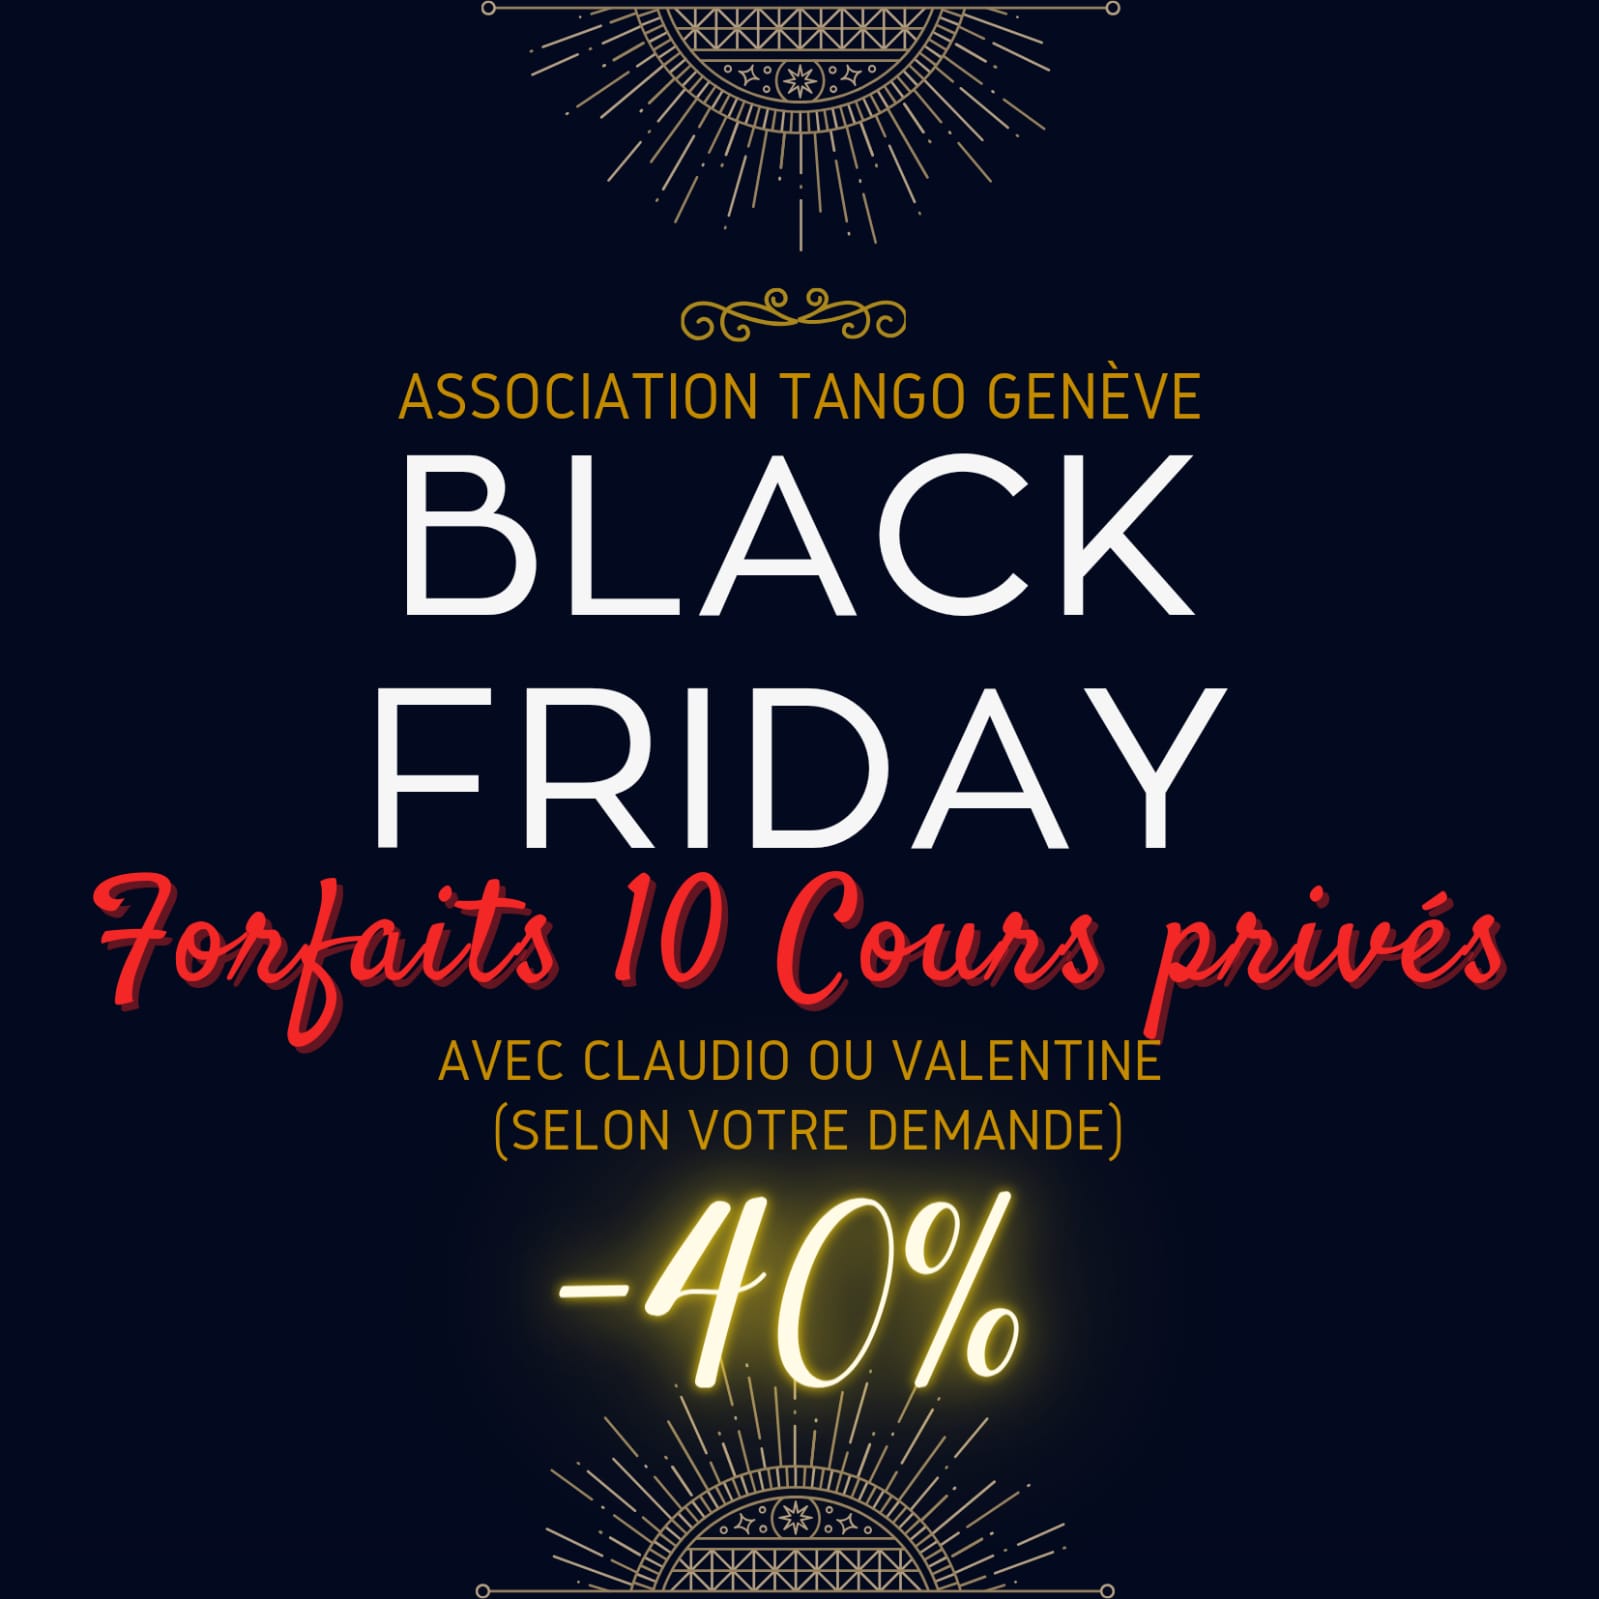 Black Friday forfait 10 cours privs